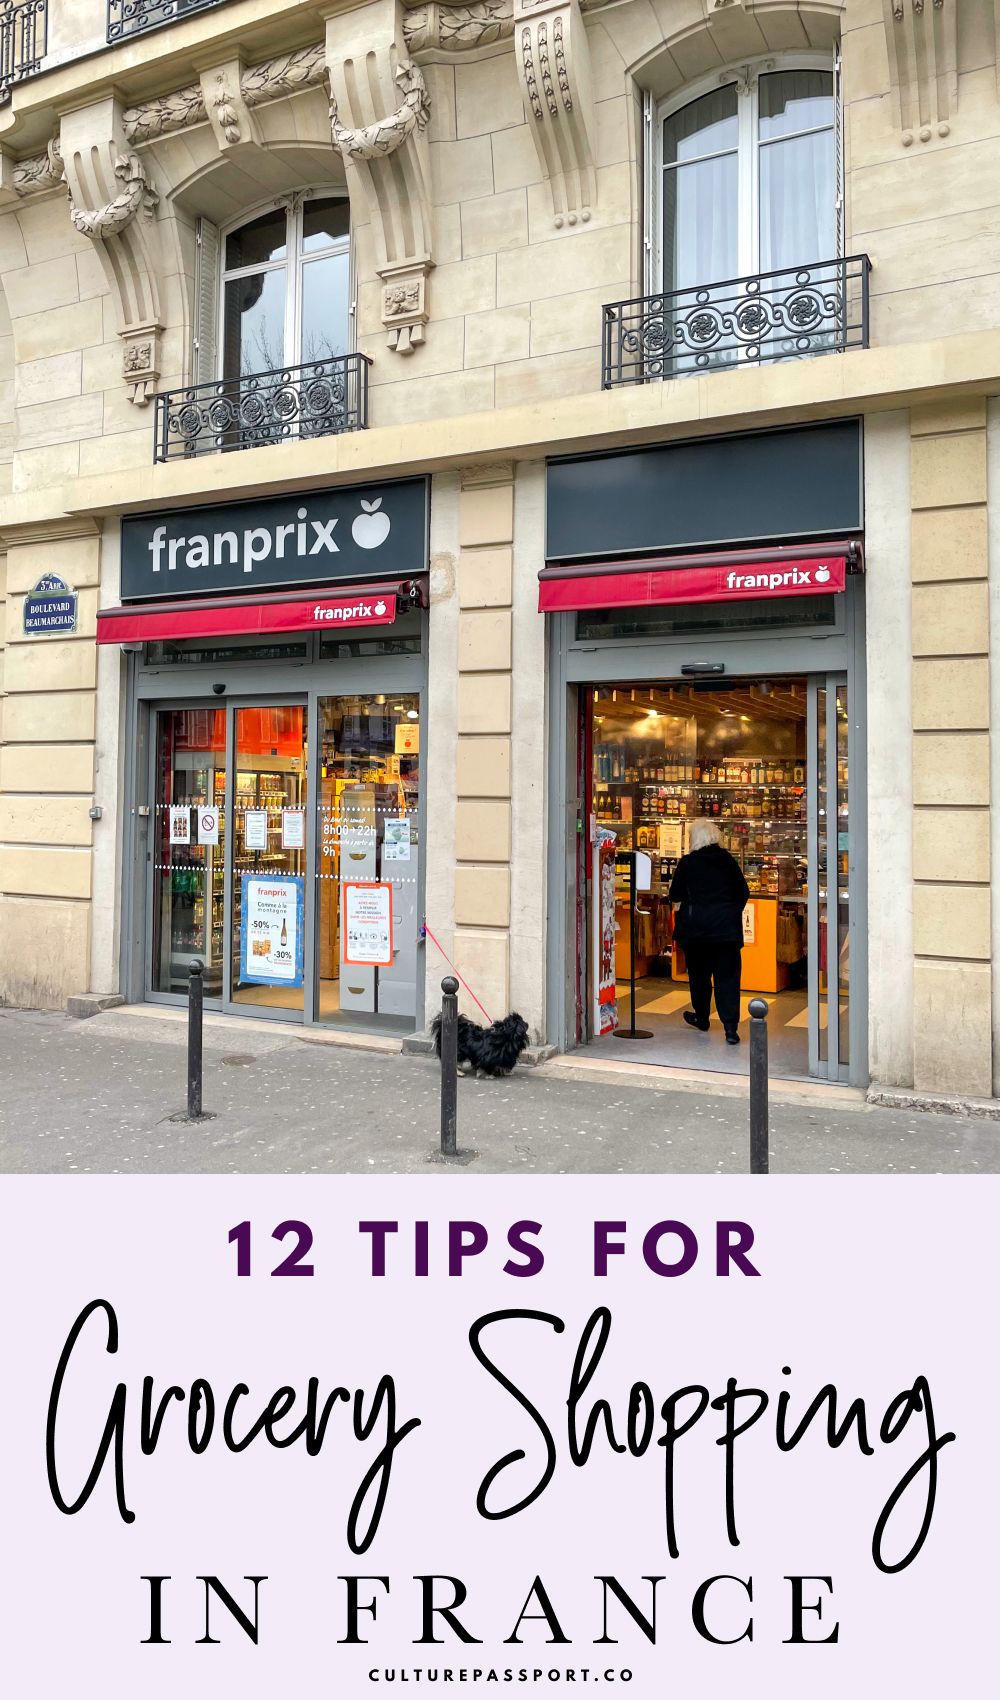 12 Tips For Grocery Shopping In Paris and France